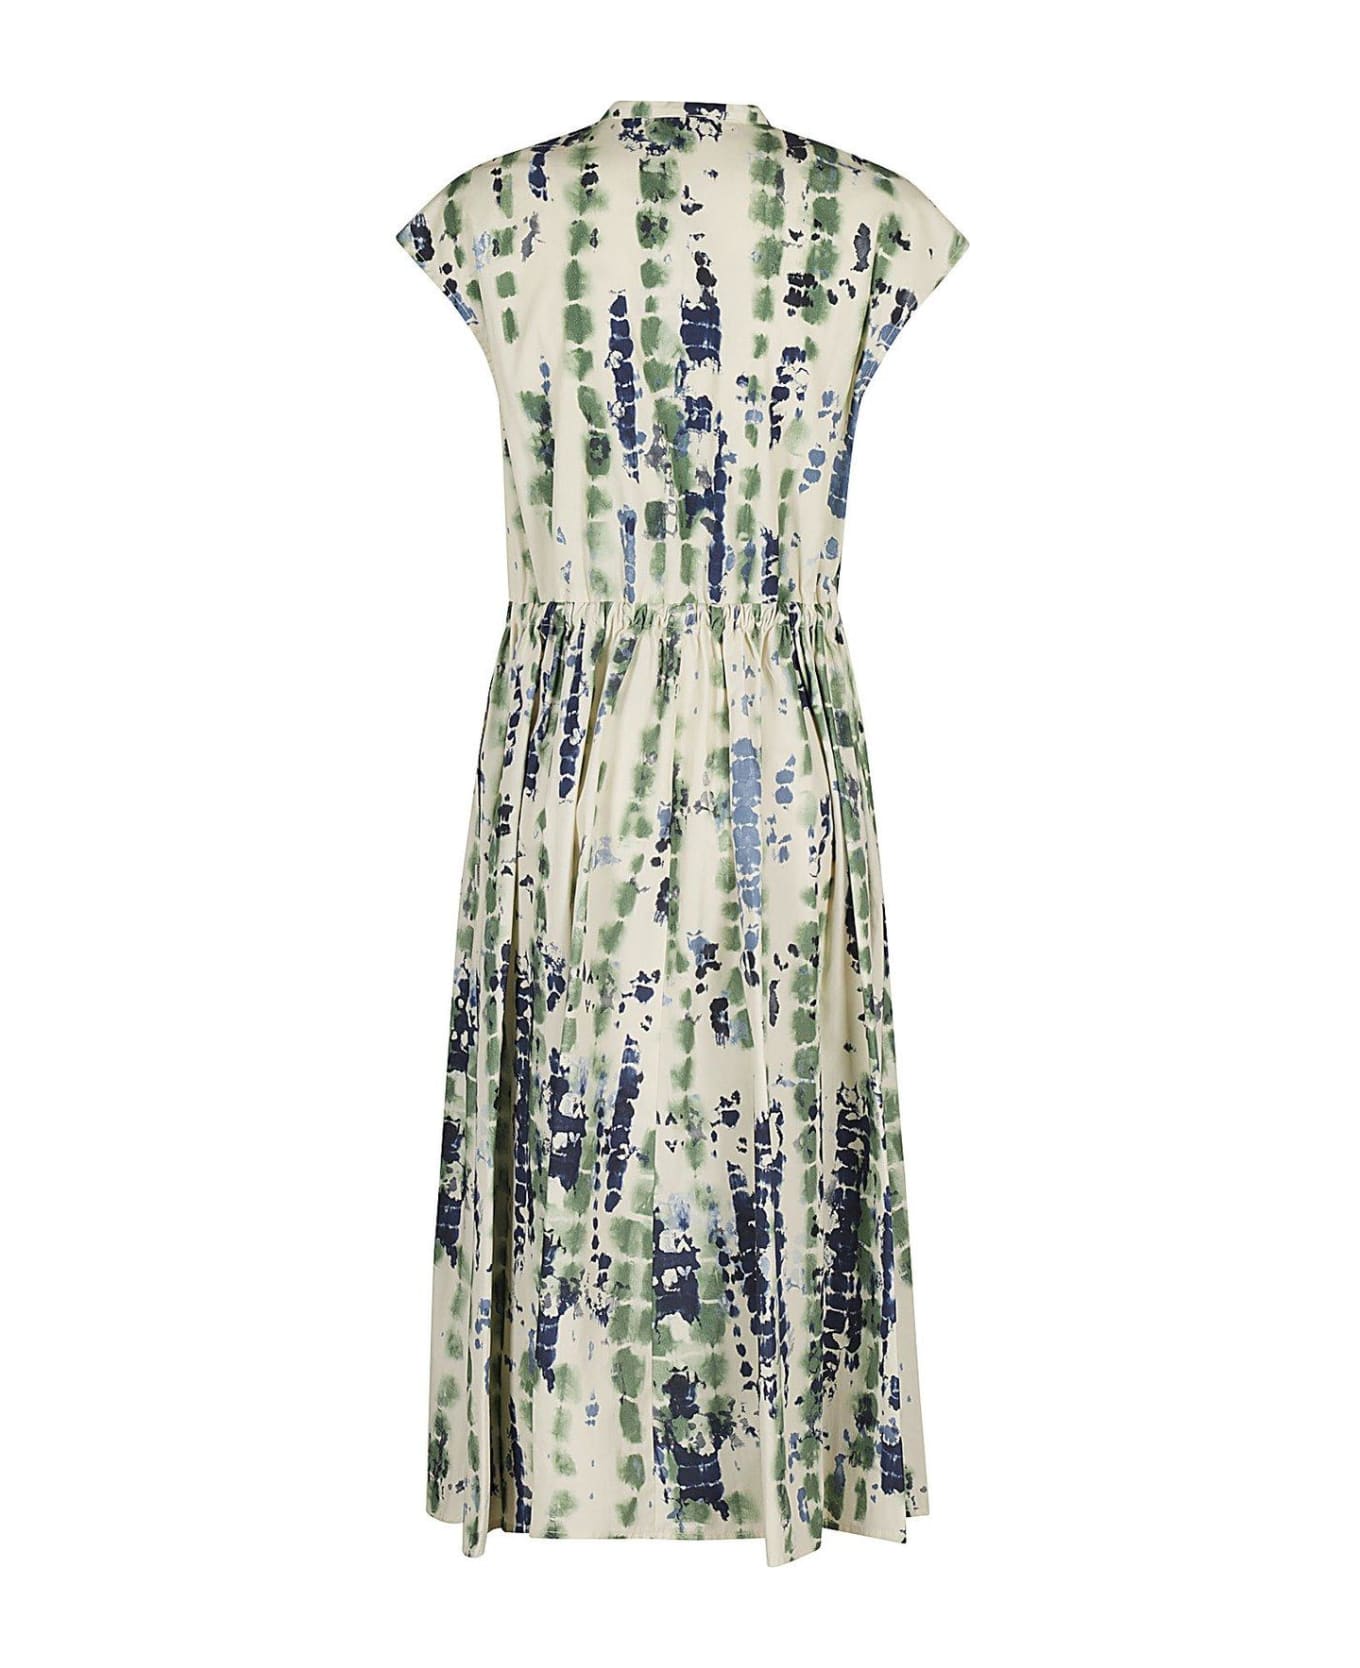 Woolrich All-over Motif Printed Midi Dress - Sage